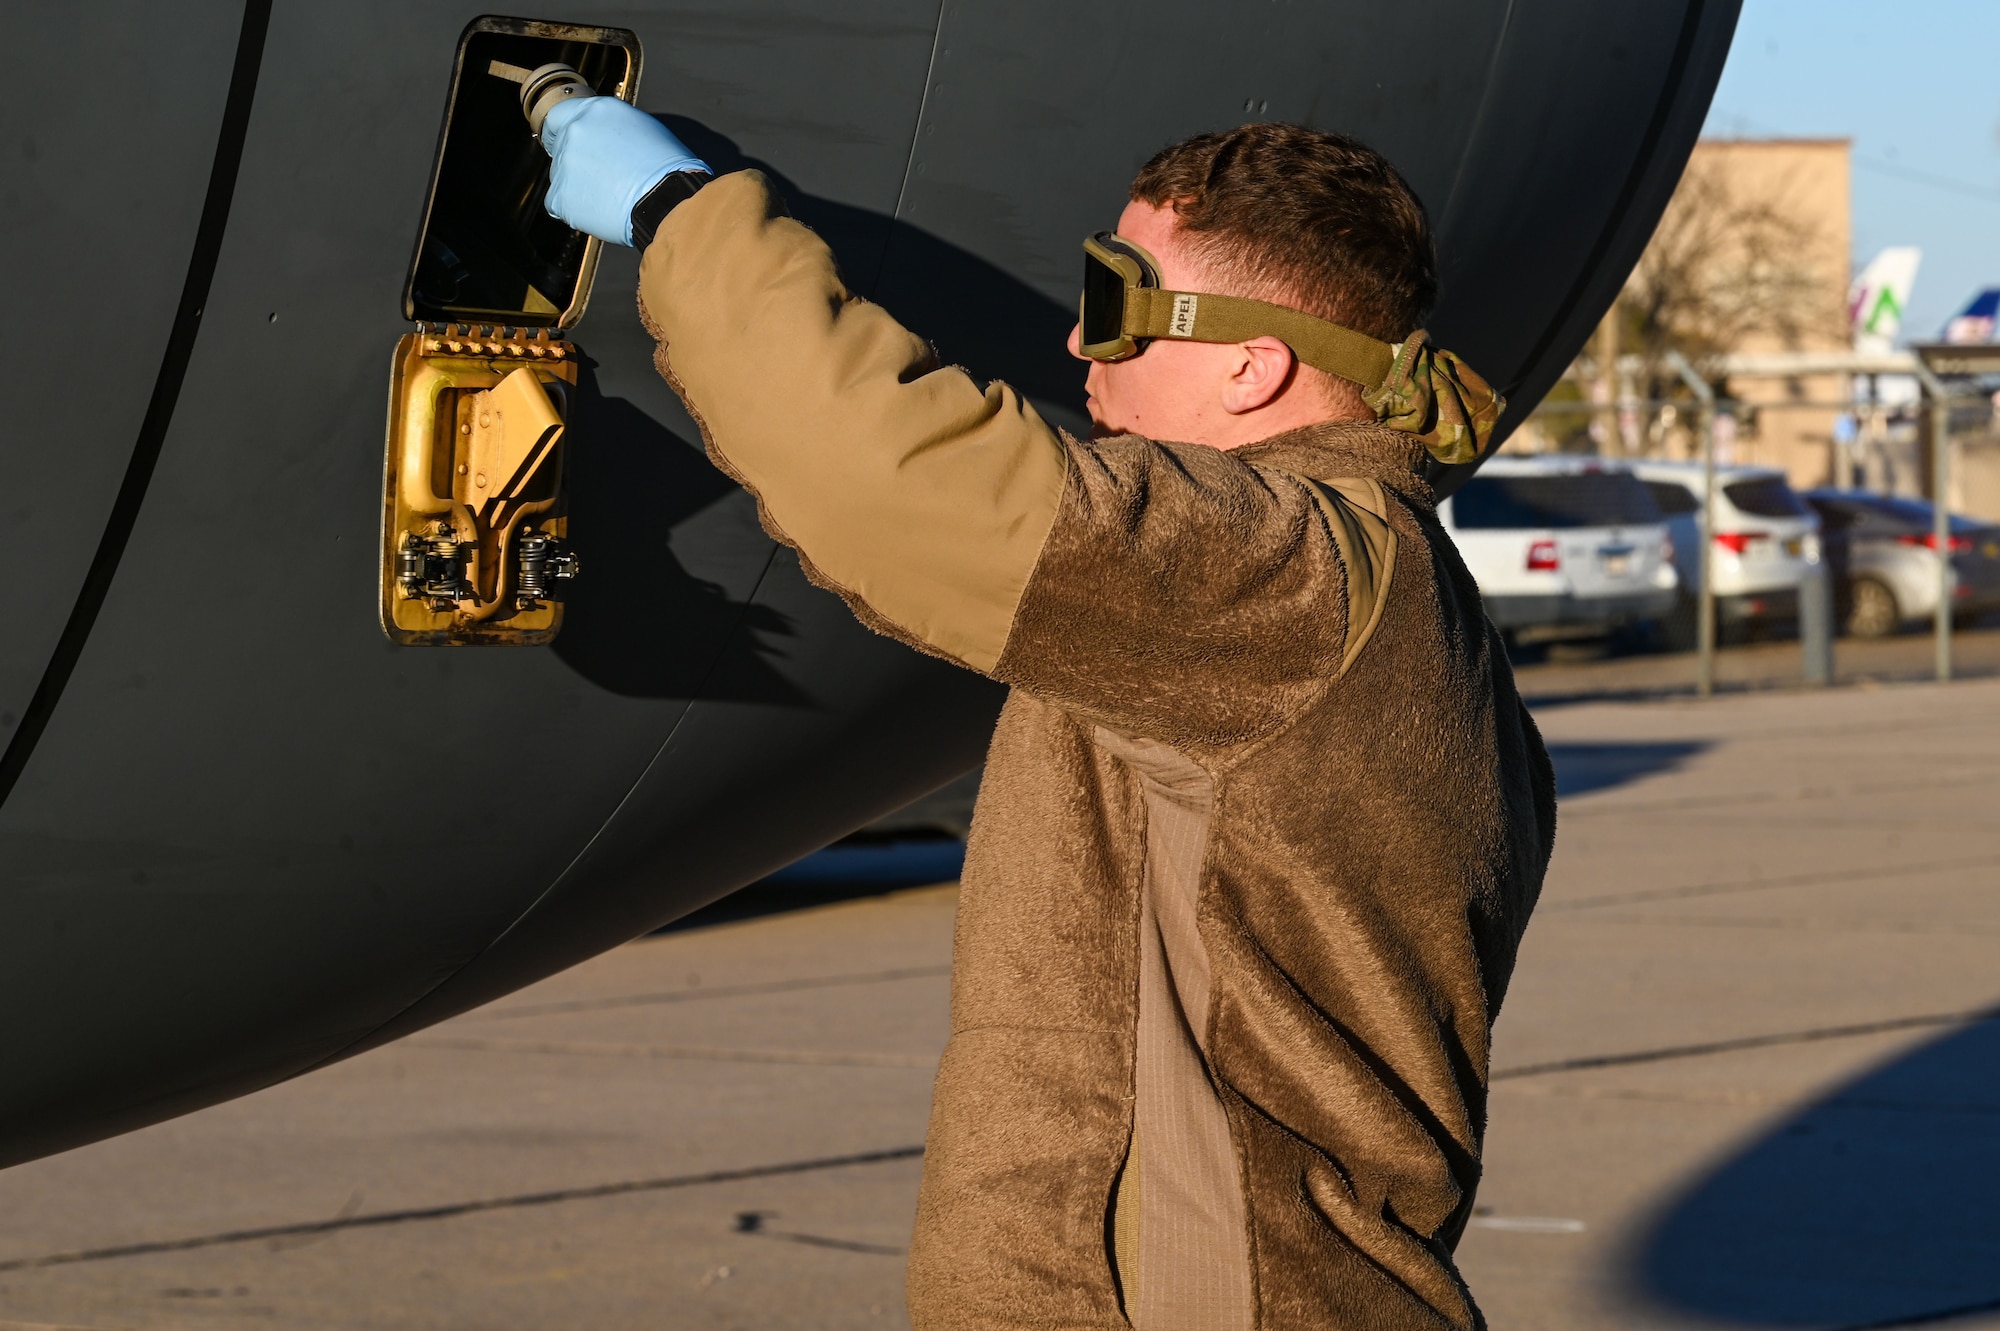 U.S. Air Force Senior Airman Randy Cruz, 92nd Aircraft Maintenance Squadron propulsion system apprentice, services a KC-135 Stratotanker after an endurance exercise at Roswell, New Mexico, Feb. 17, 2023. The 92nd Air Refueling Wing deployed personnel and KC-135 Stratotankers, to execute a Phase 2 Lead Wing exercise in preparation to be lead tanker wing at Air Mobility Command’s capstone exercise, Mobility Guardian 2023. (U.S. Air Force photo by Airman 1st Class Haiden Morris)